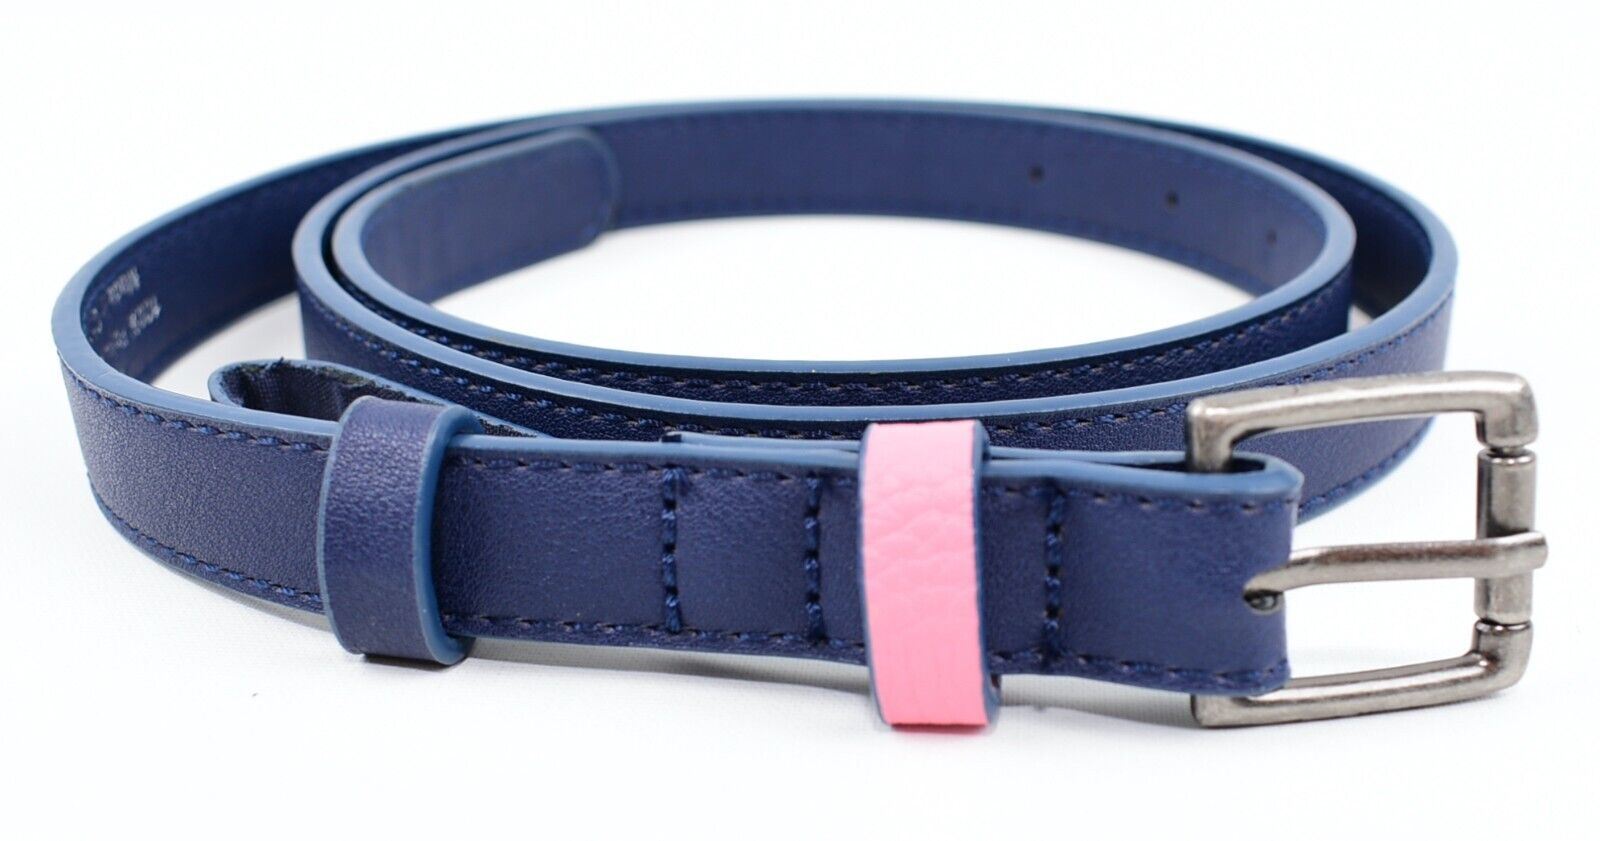 JACK WILLS Womens FENCHURCH Skinny Belt, Faux Leather, Navy Blue, size M-L